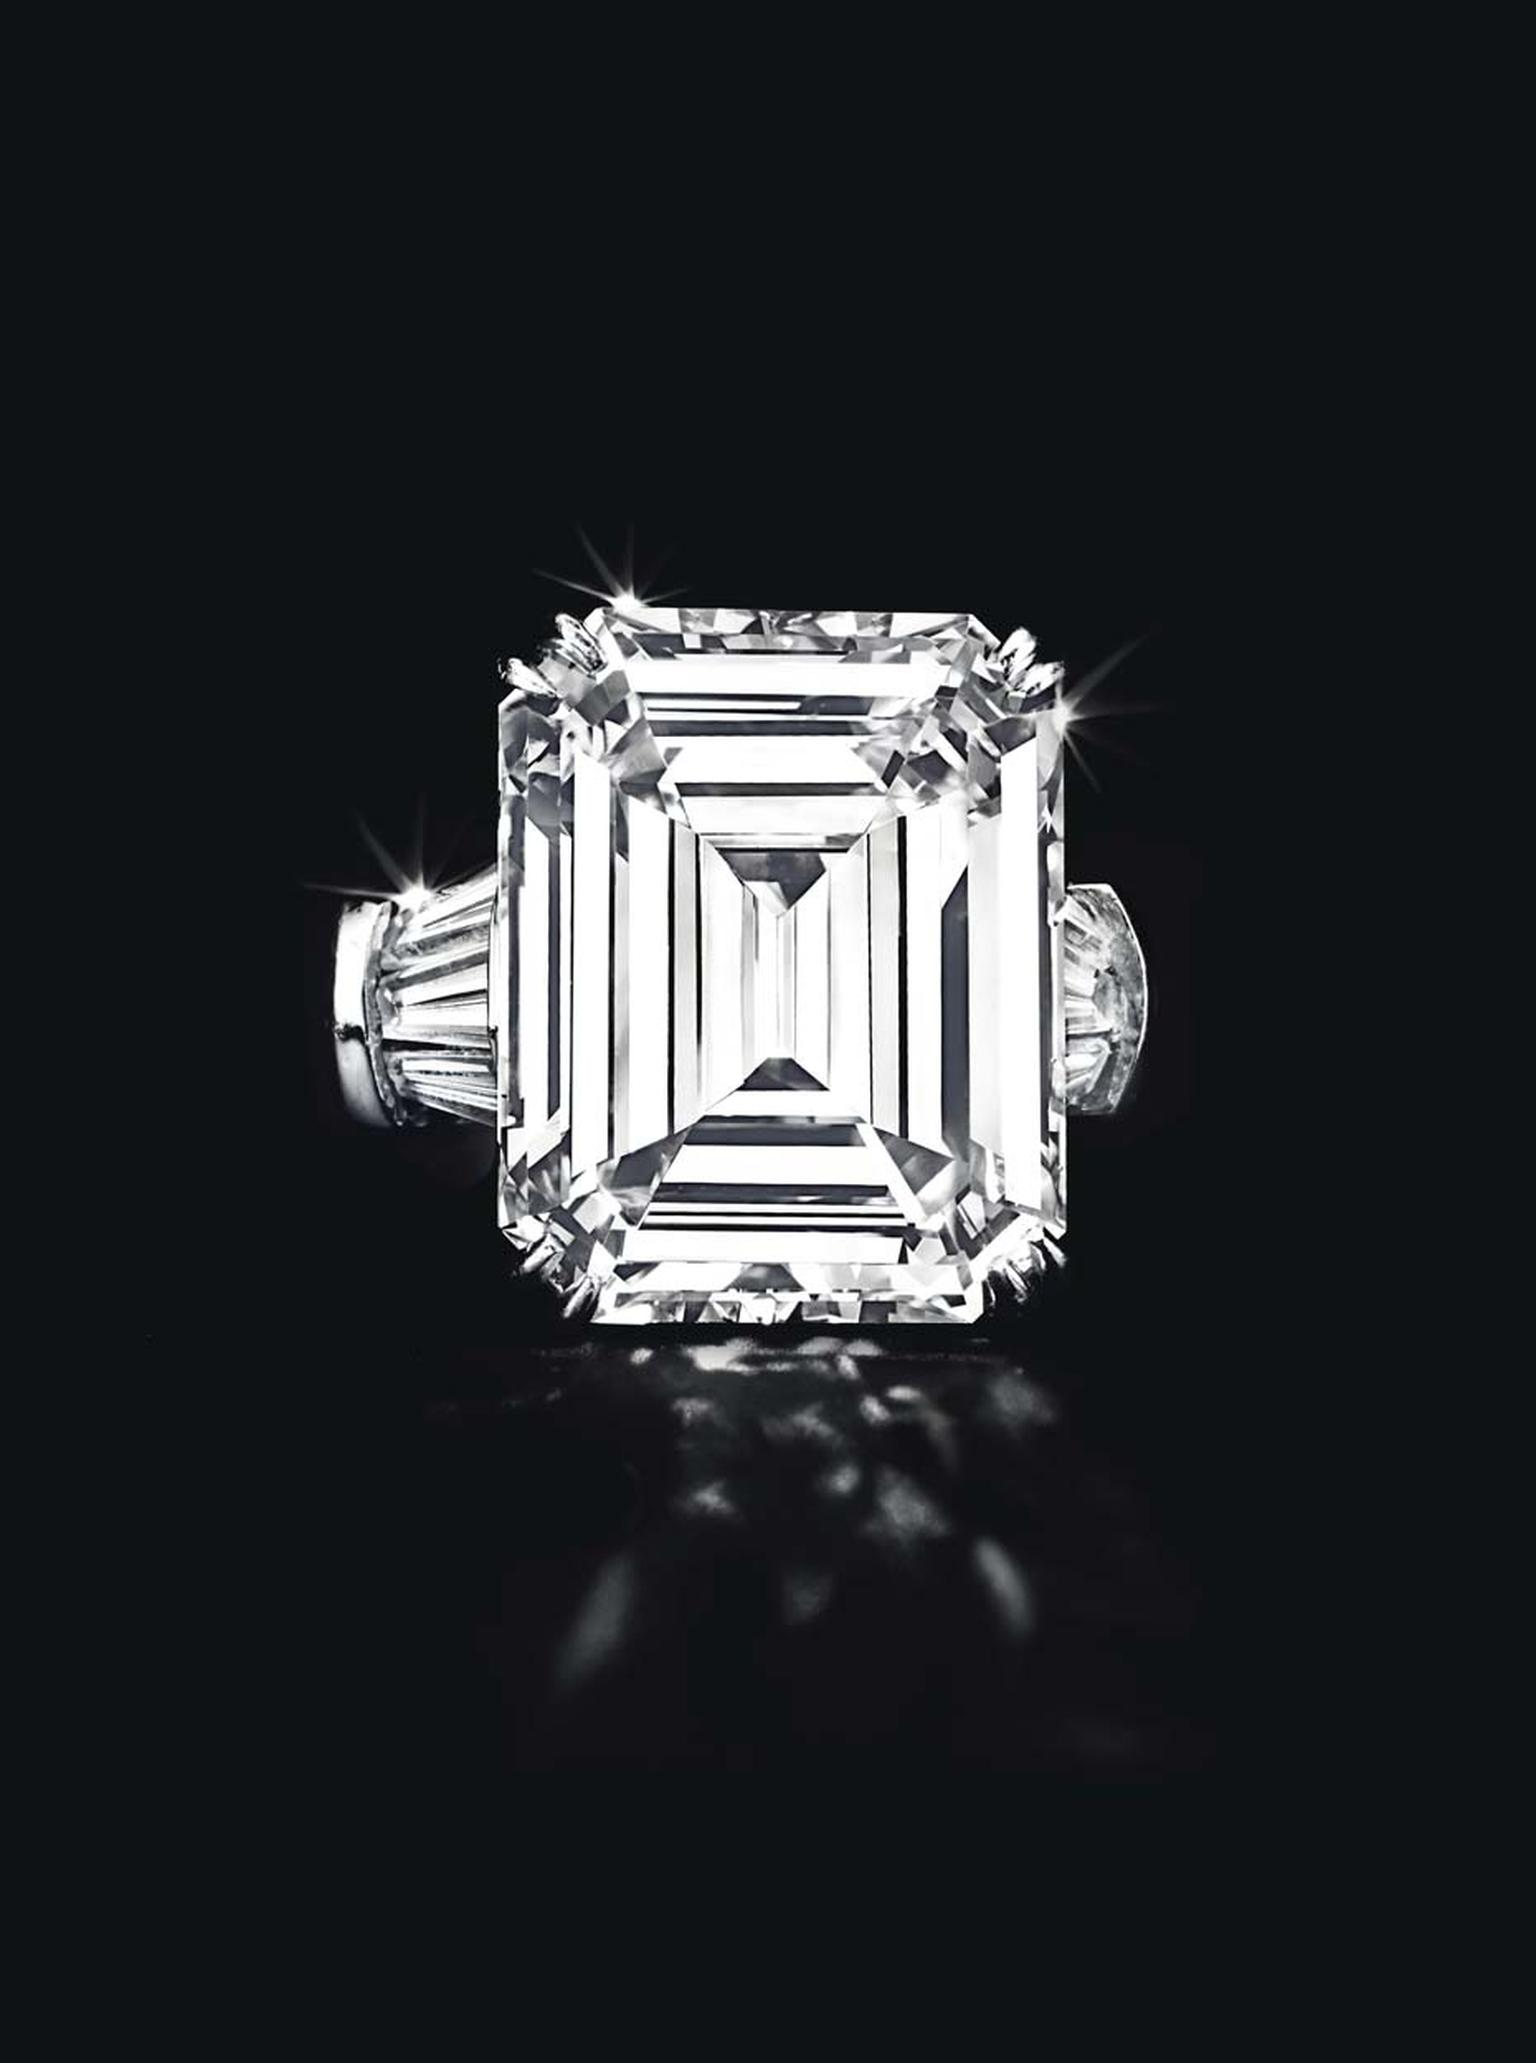 Lot 249, an important diamond ring by Harry Winston, set with a 20.10ct rectangular-cut diamond, flanked by baguette-cut diamonds, mounted in platinum (US$2-3 million)